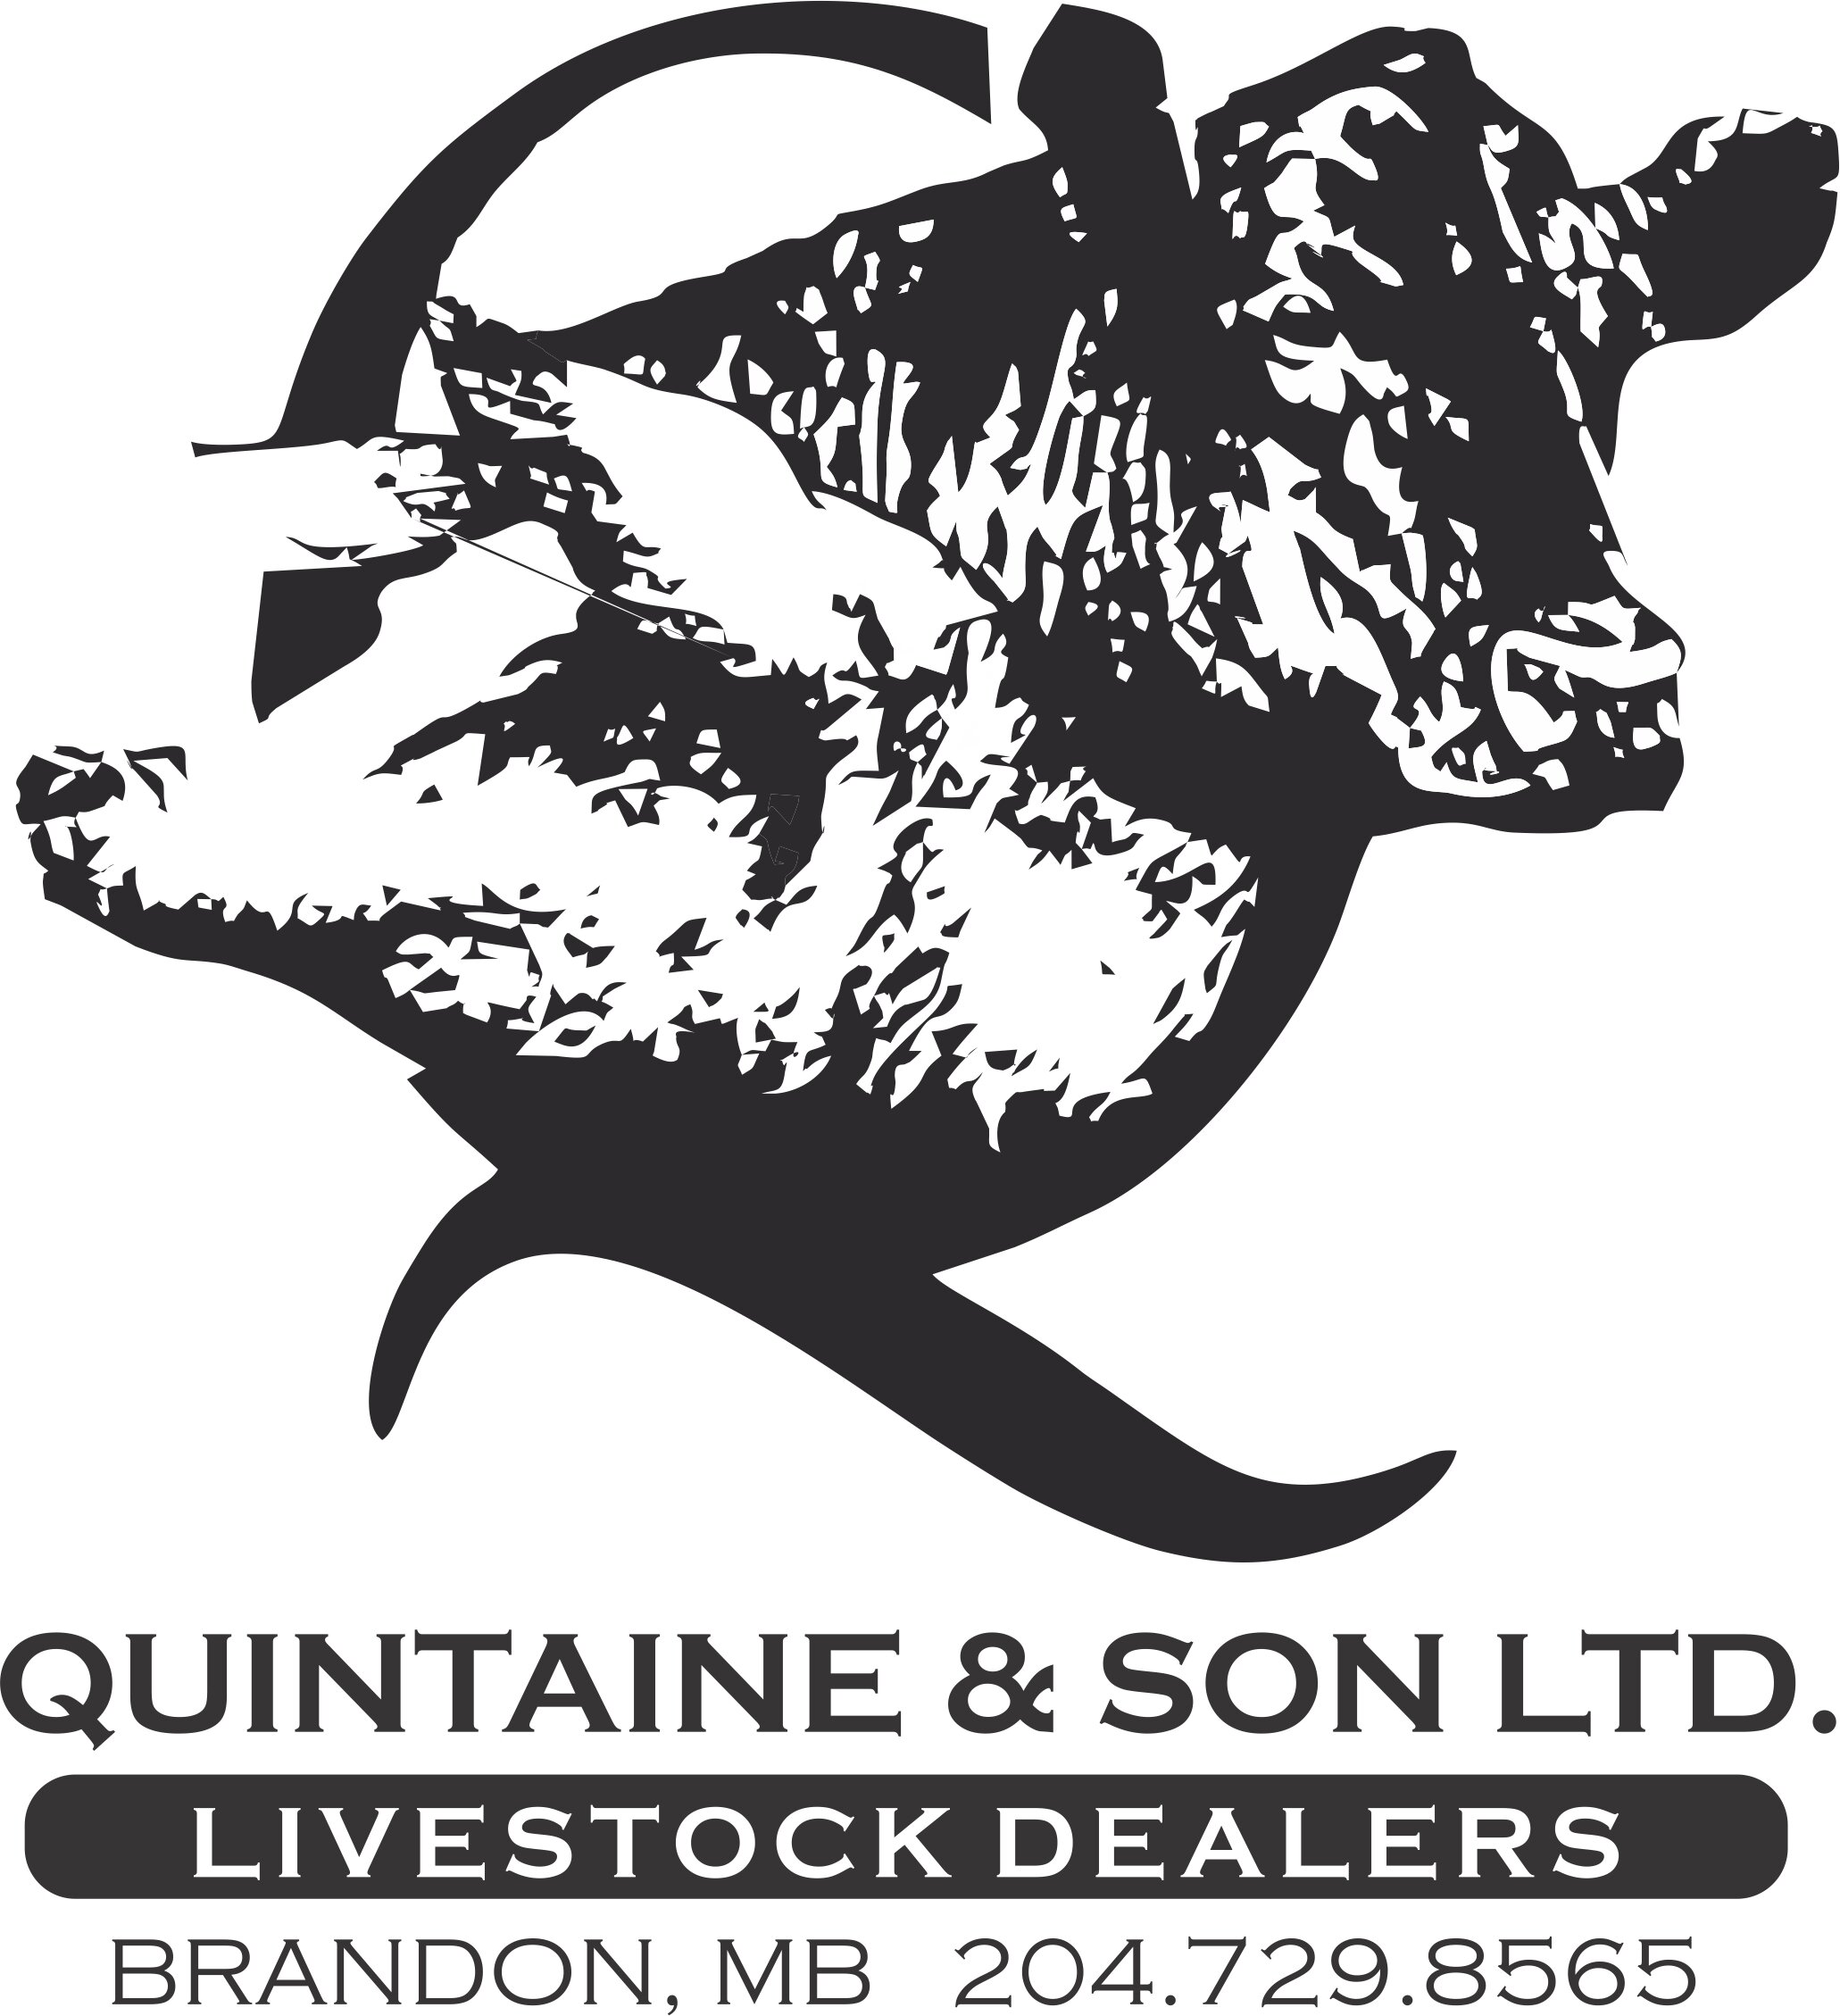 Quintaines Full Logo (with text).jpg